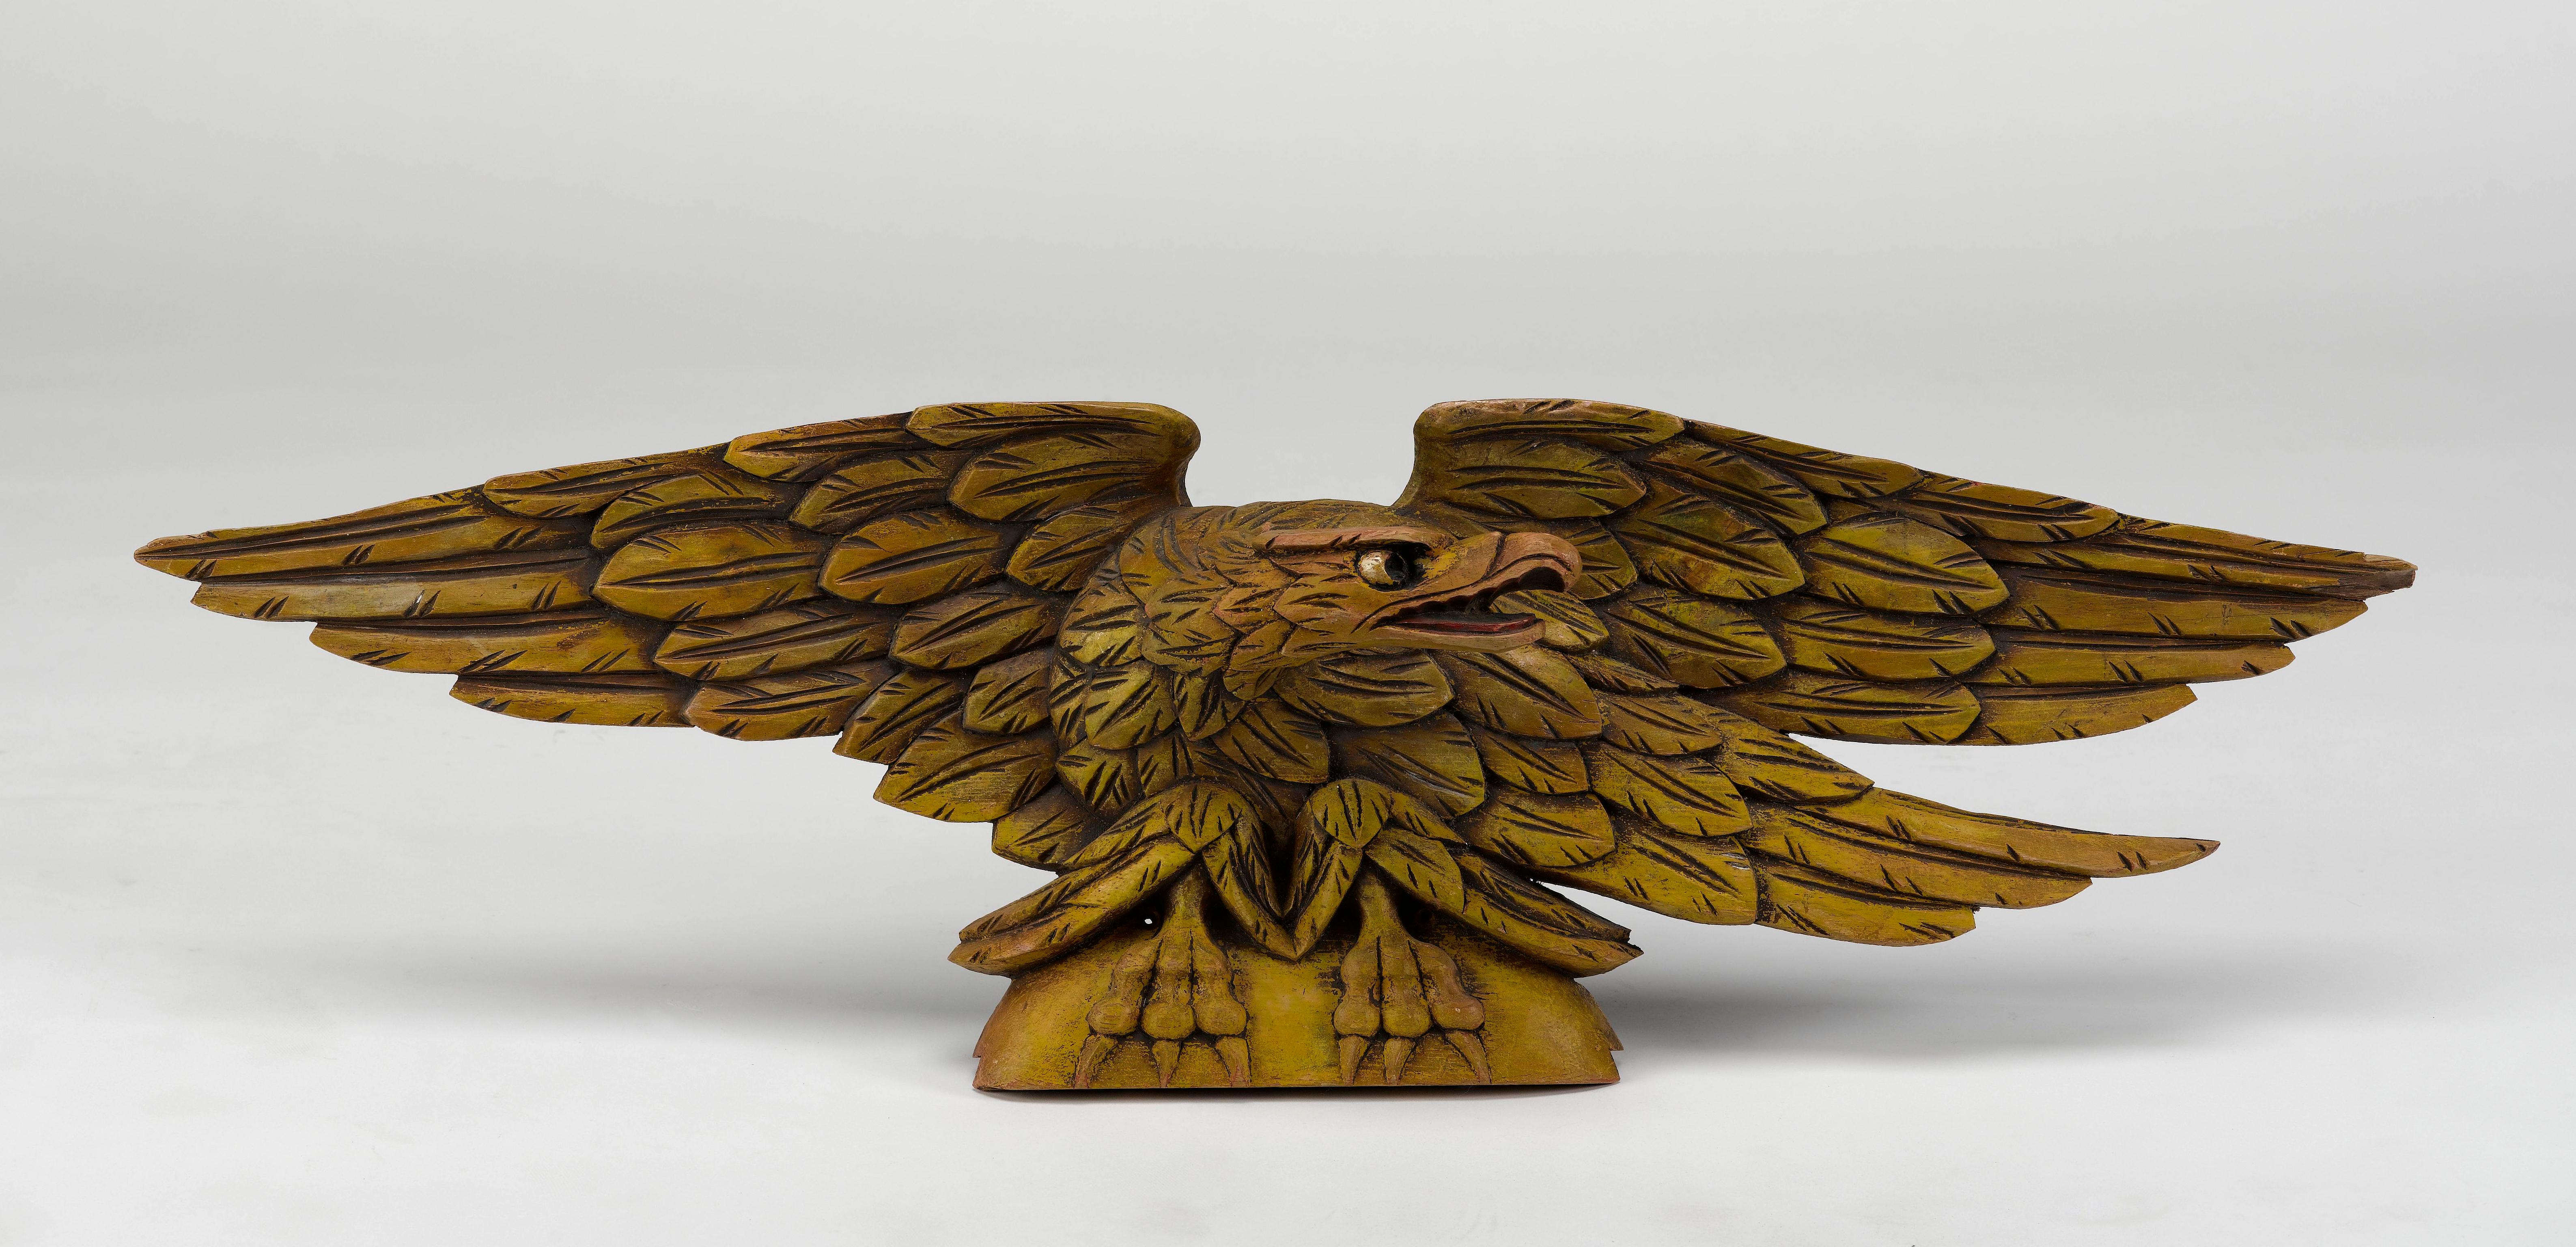 This is an original American eagle, hand-carved from pine during the early to mid 20th century. The eagle features a touch of original gilt over yellow sizing with hand-painted highlights, emphasizing the eyes and beak.

The eagle is displayed with